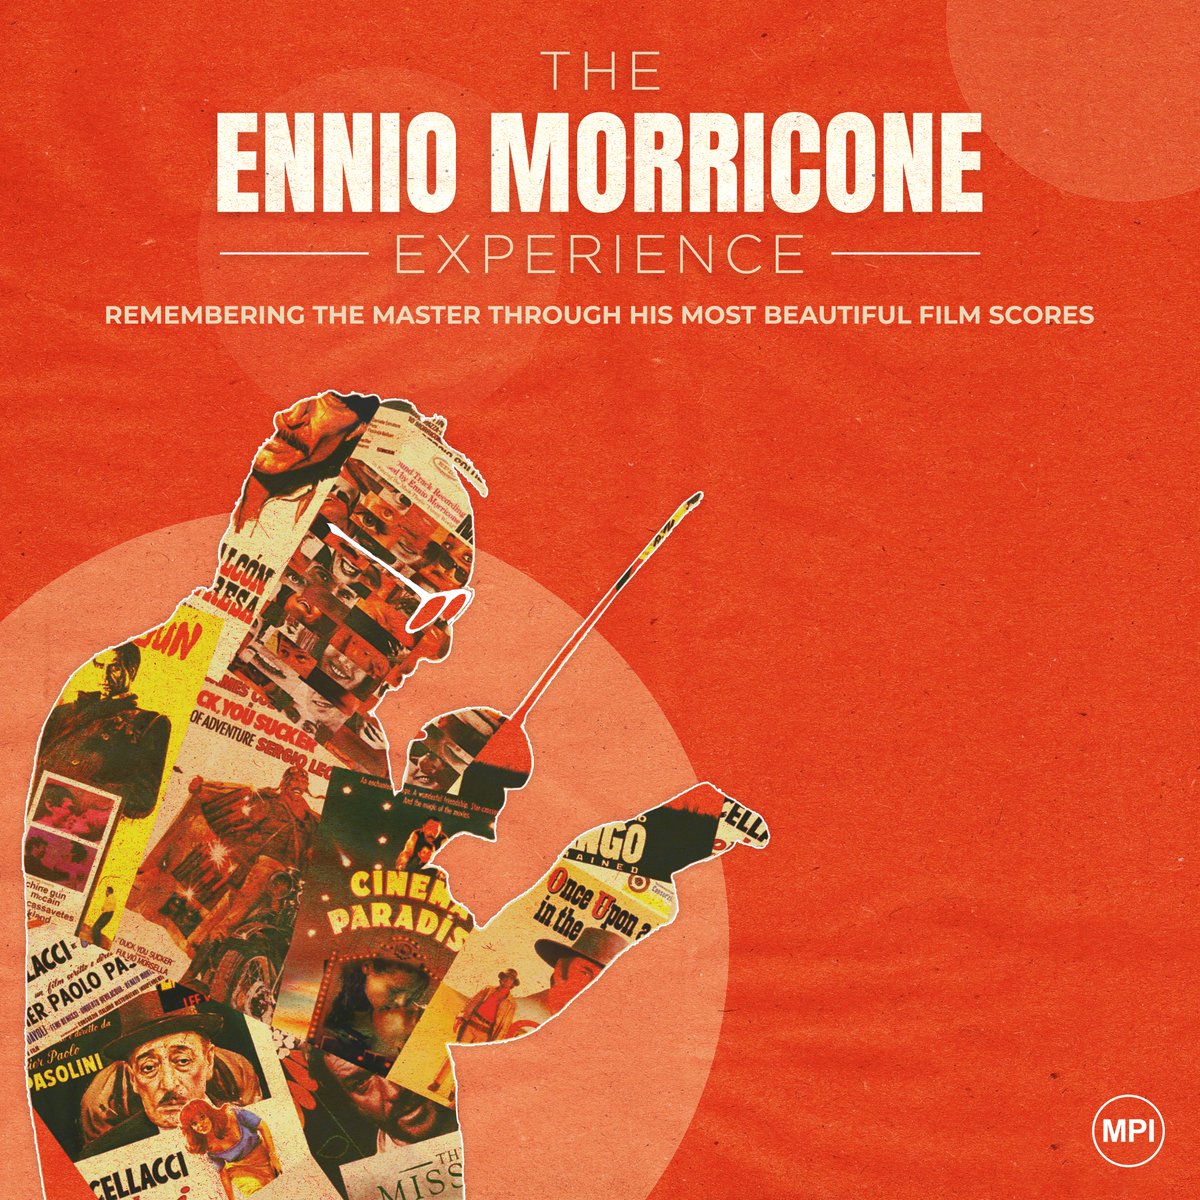 🎼 The Ennio Morricone Experience comes to Solstice this October! Tickets on sale Thursday 28 March. 📅 Sat 12 October ⏰ 8pm 🎫 solsticeartscentre.ie/event/the-enni…